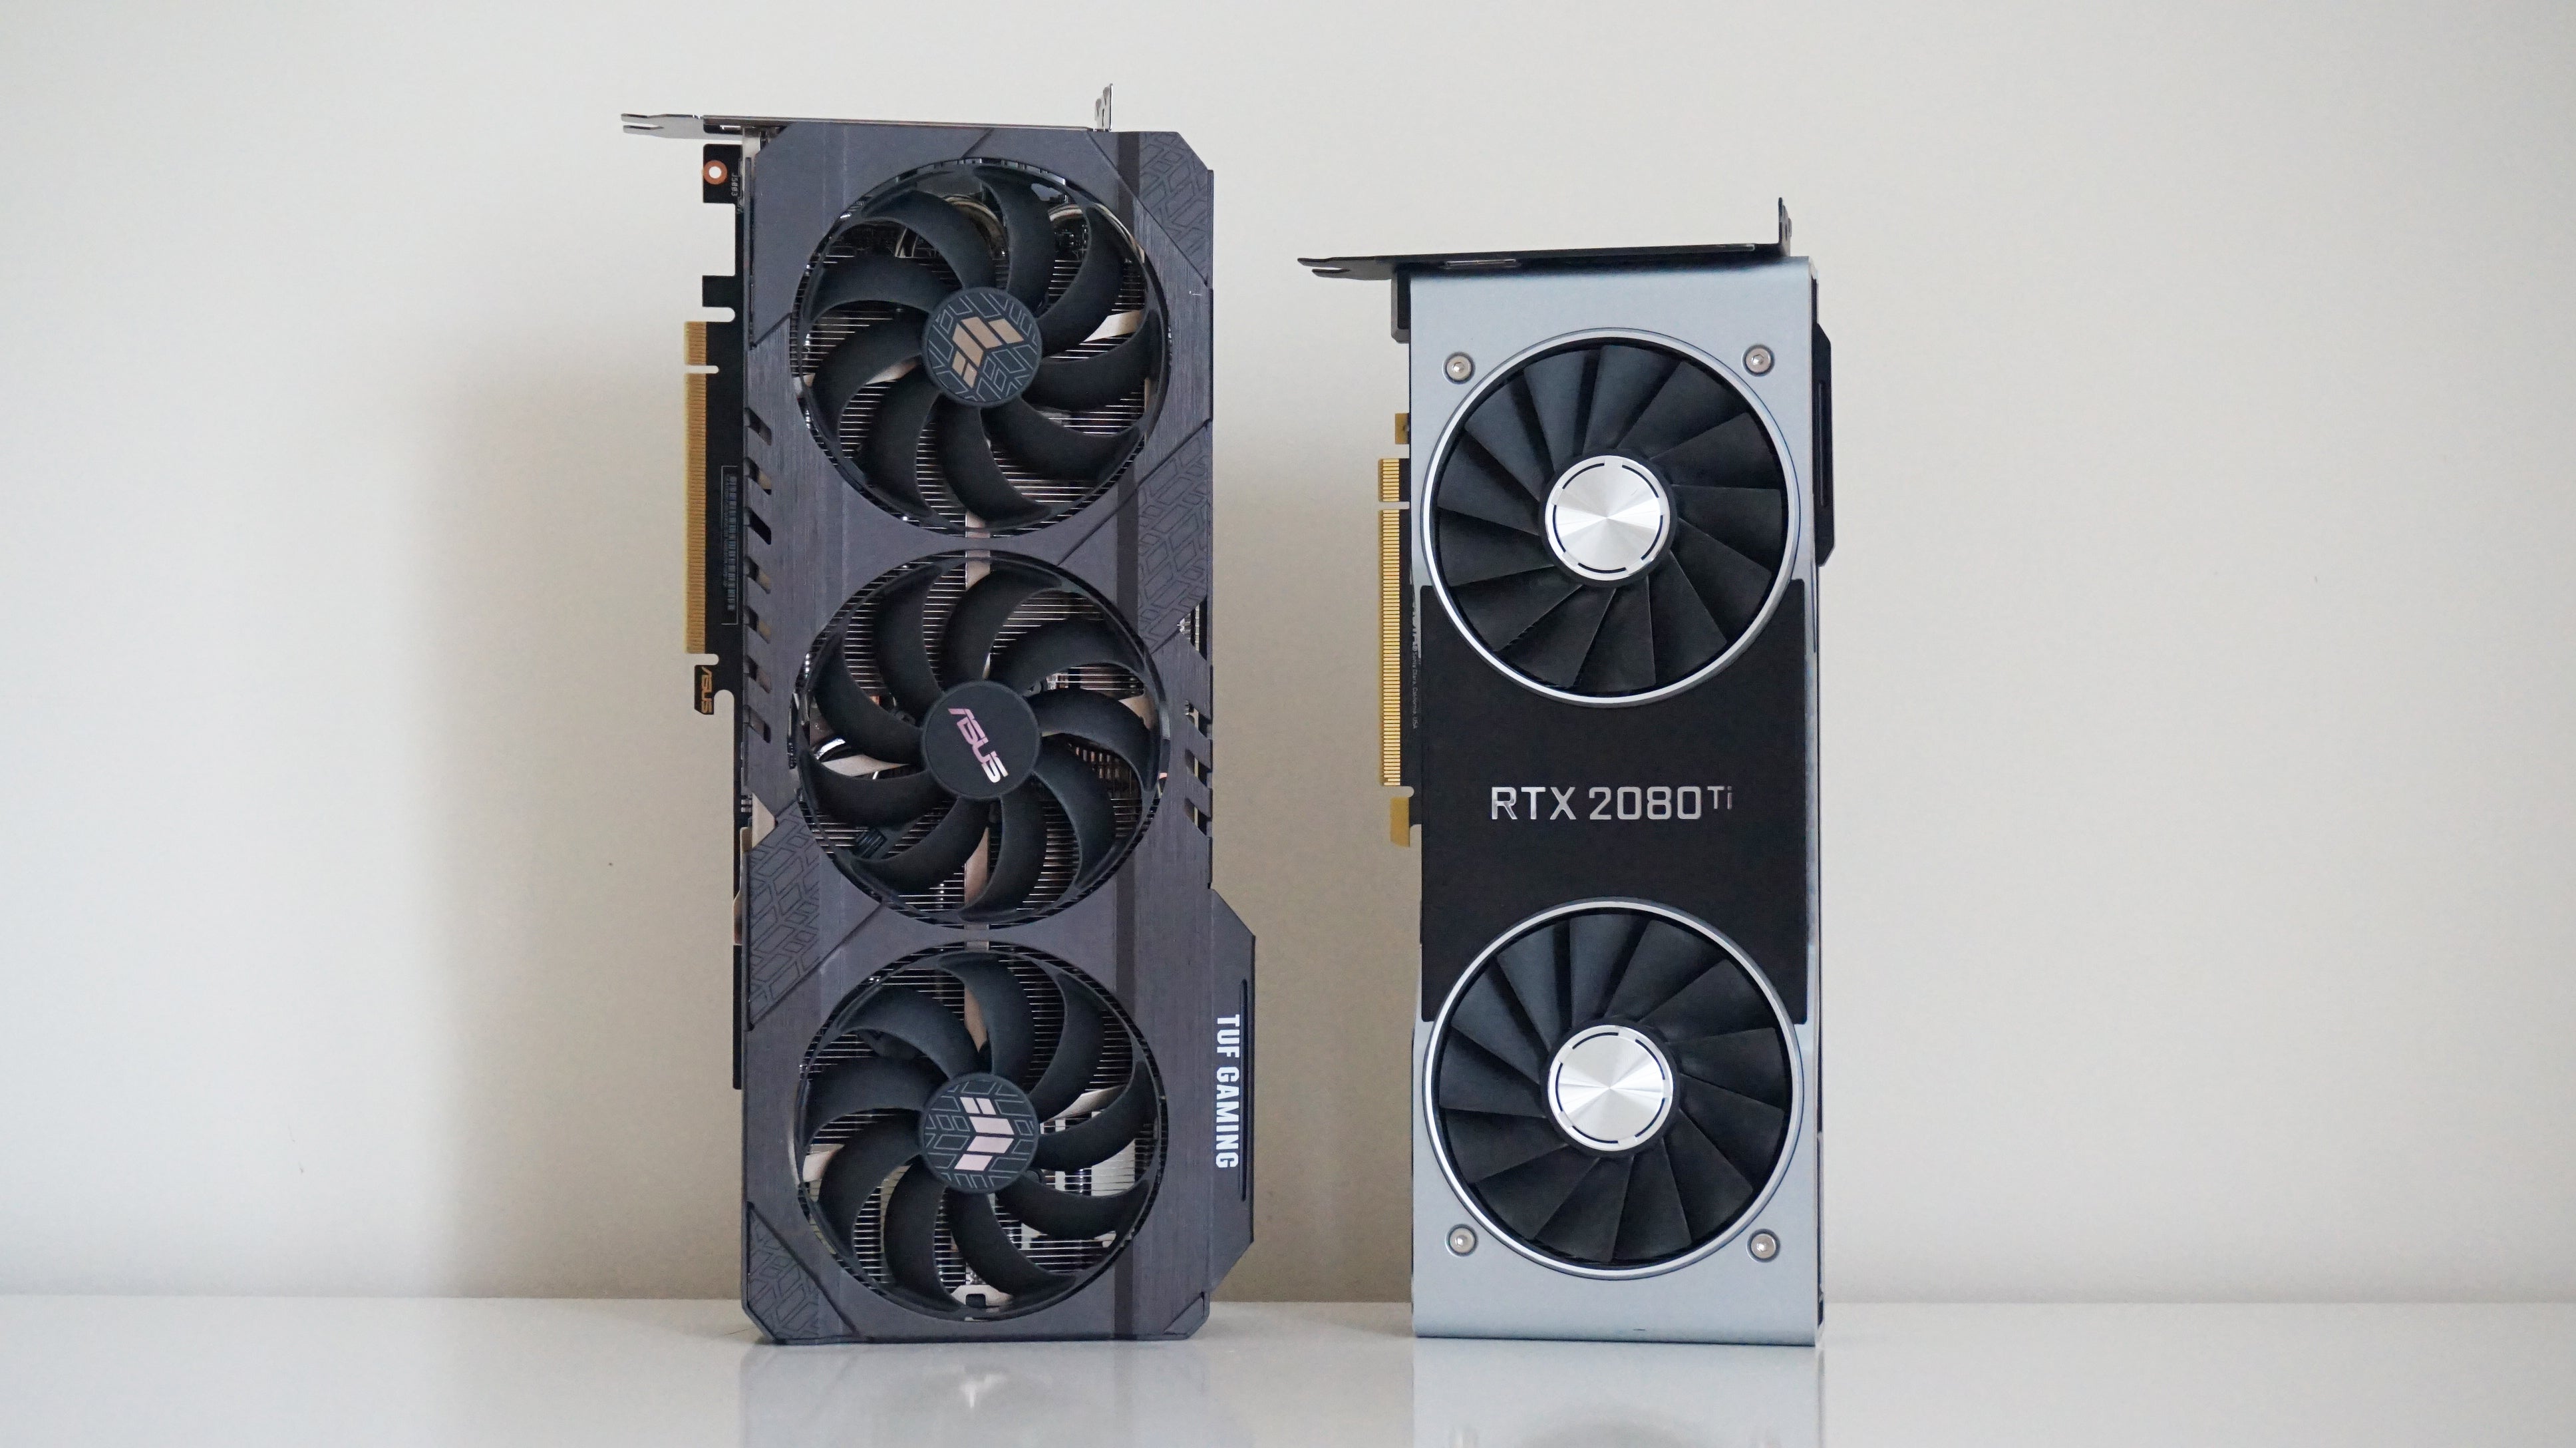 Nvidia RTX 3080 vs 2080 Ti: which 4K graphics card is better